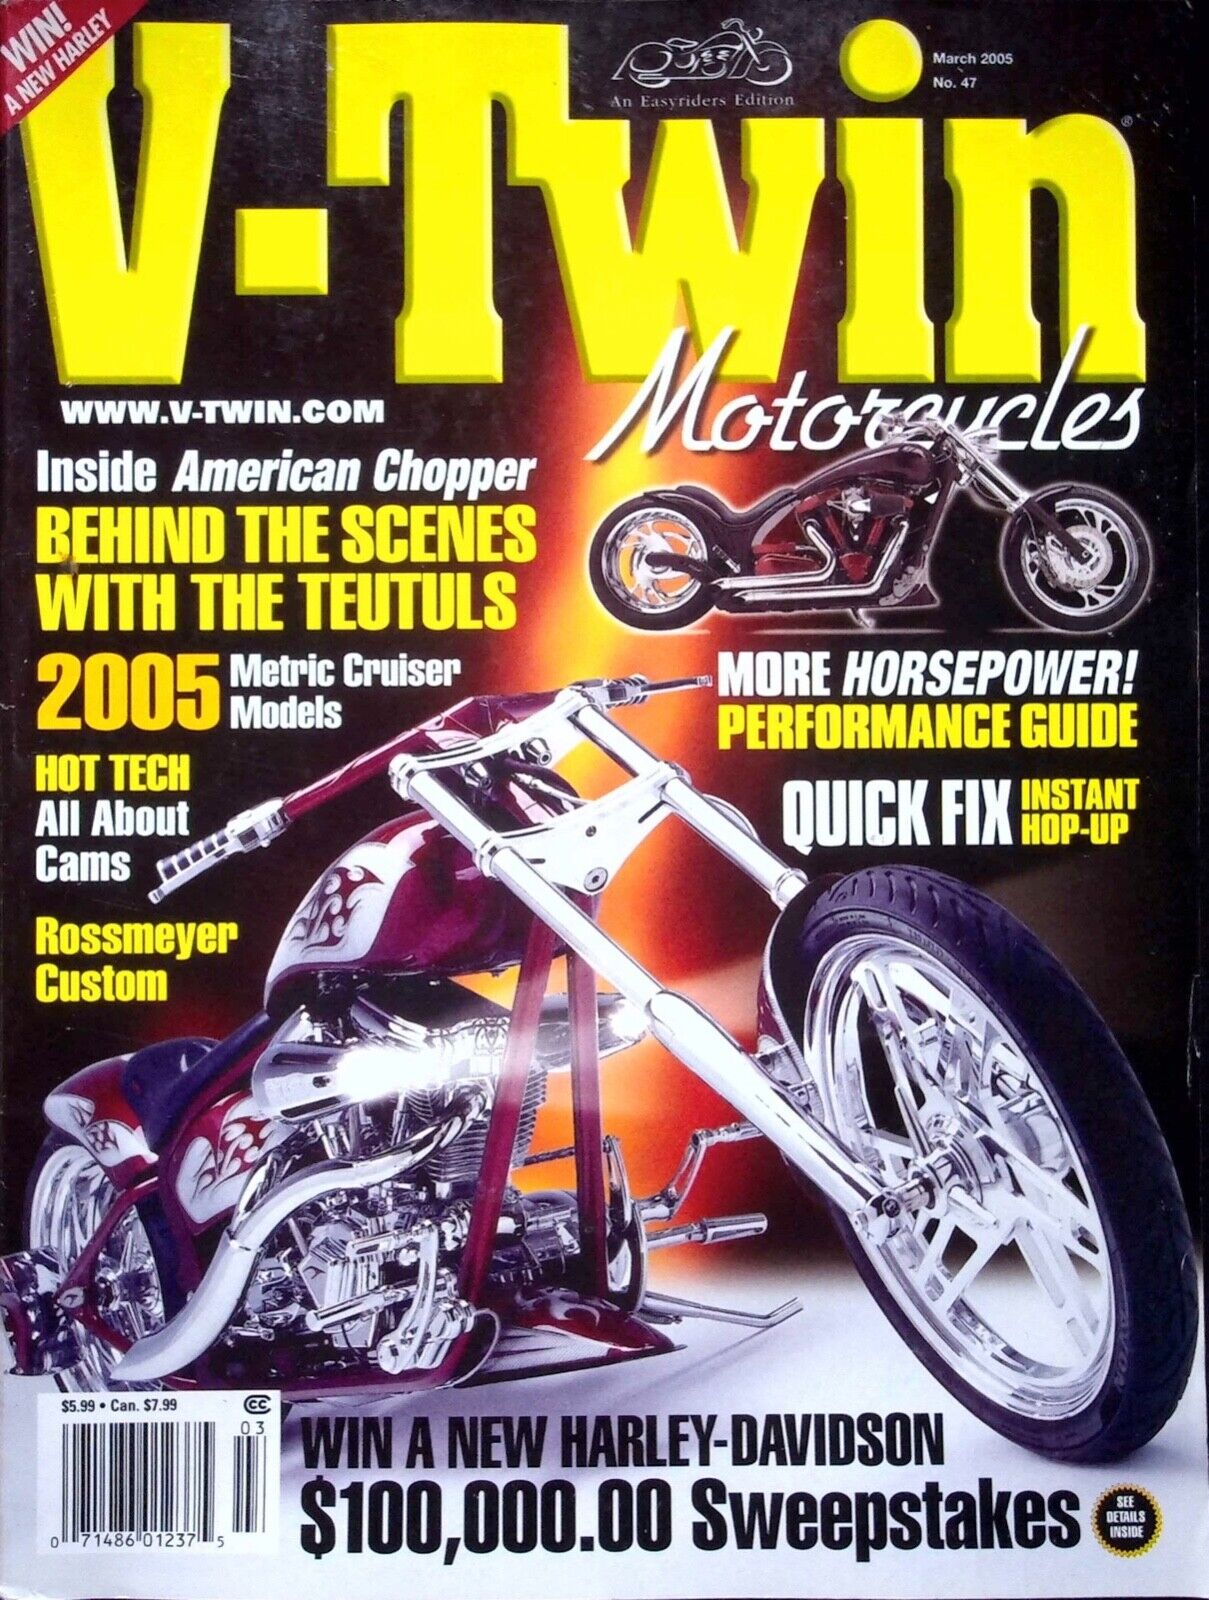 V - TWIN MOTORCYCLES MARCH 2005 NO. 47 MOTORCYCLE LIFESTYLE